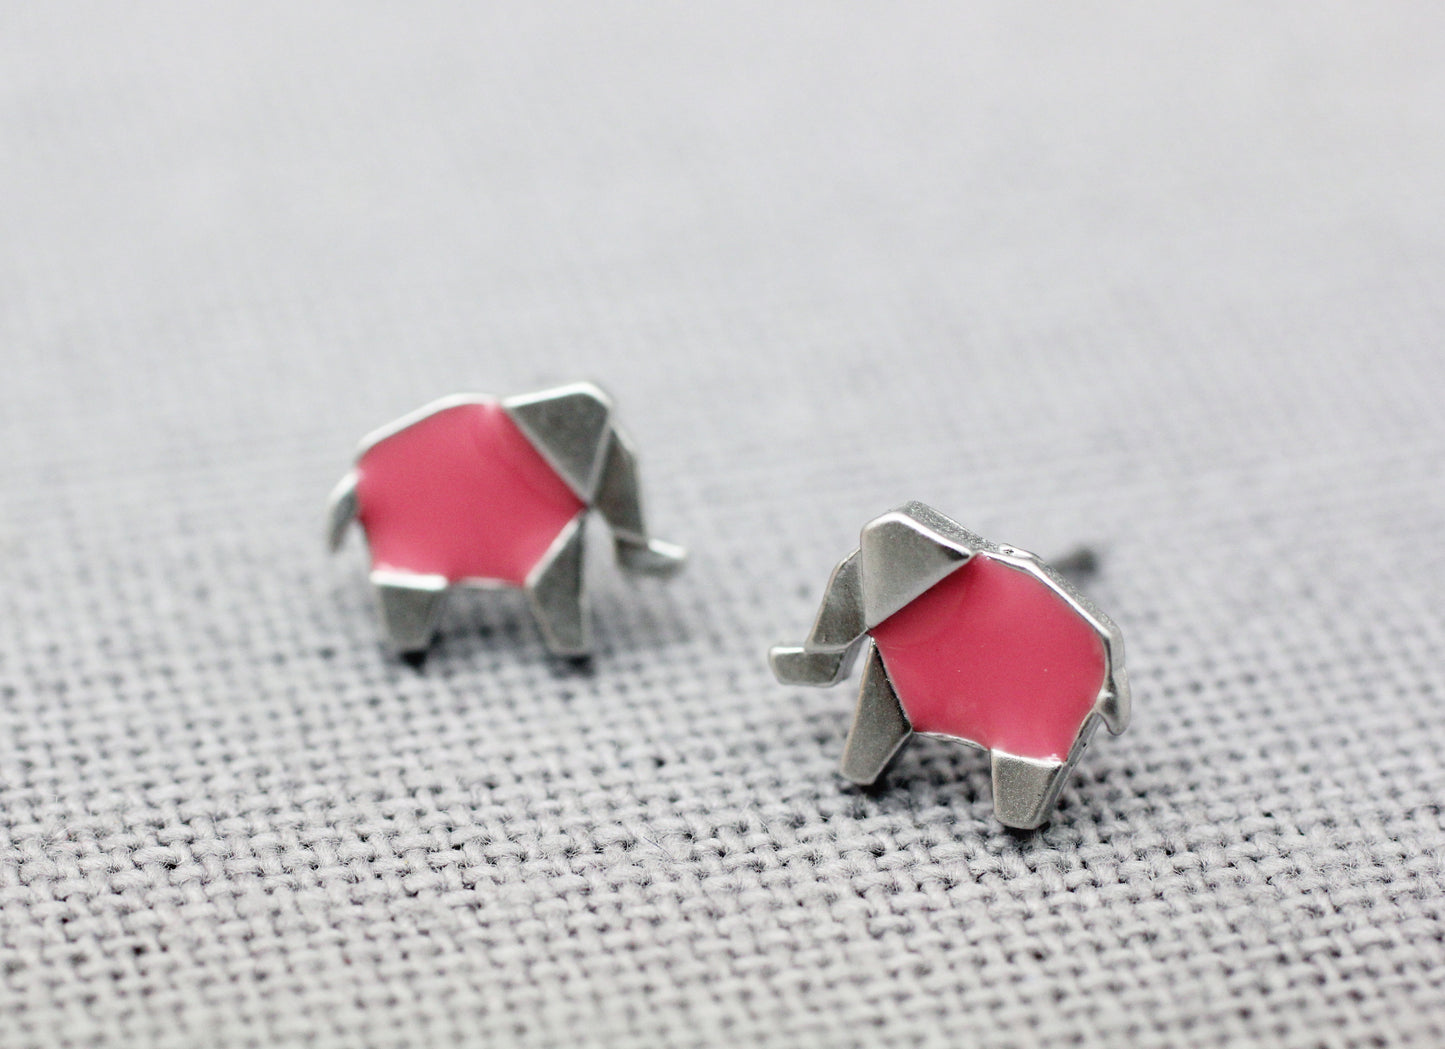 Cute Origami Elephant stud earrings pointed with glossy clear epoxy resin, color elephant earrings